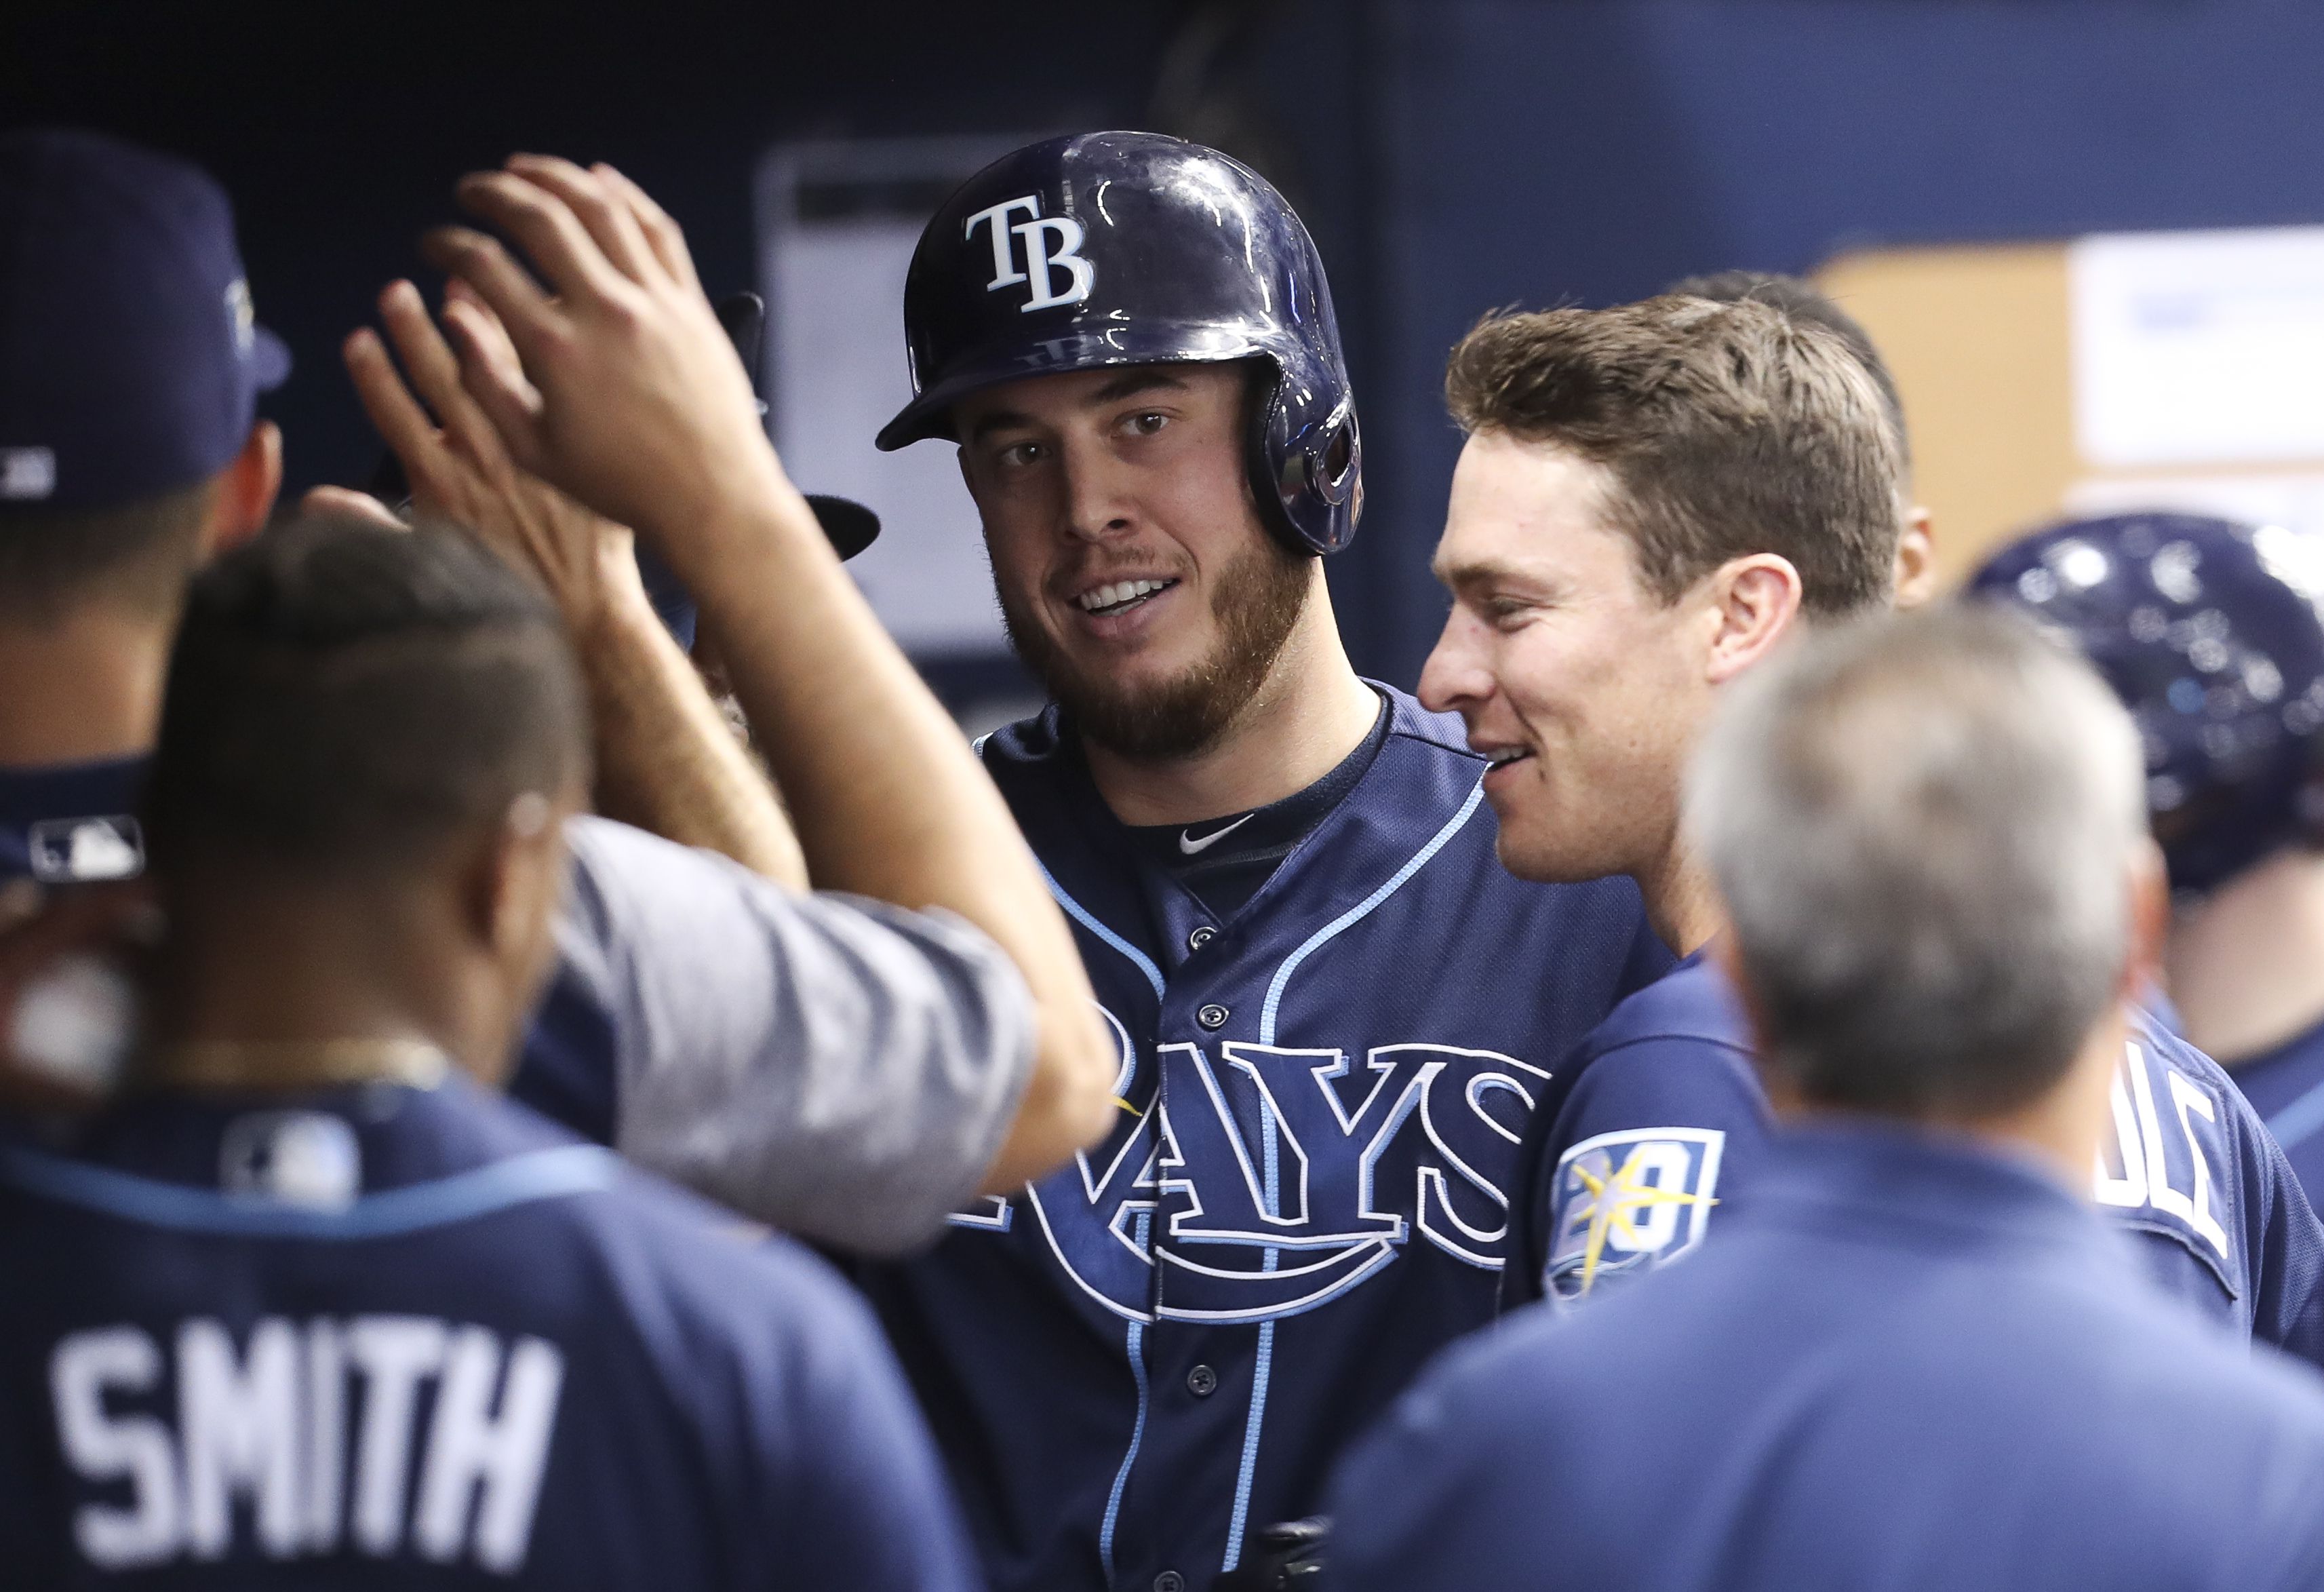 It shouldn't be a shock that the Rays have DFA'd C.J. Cron 